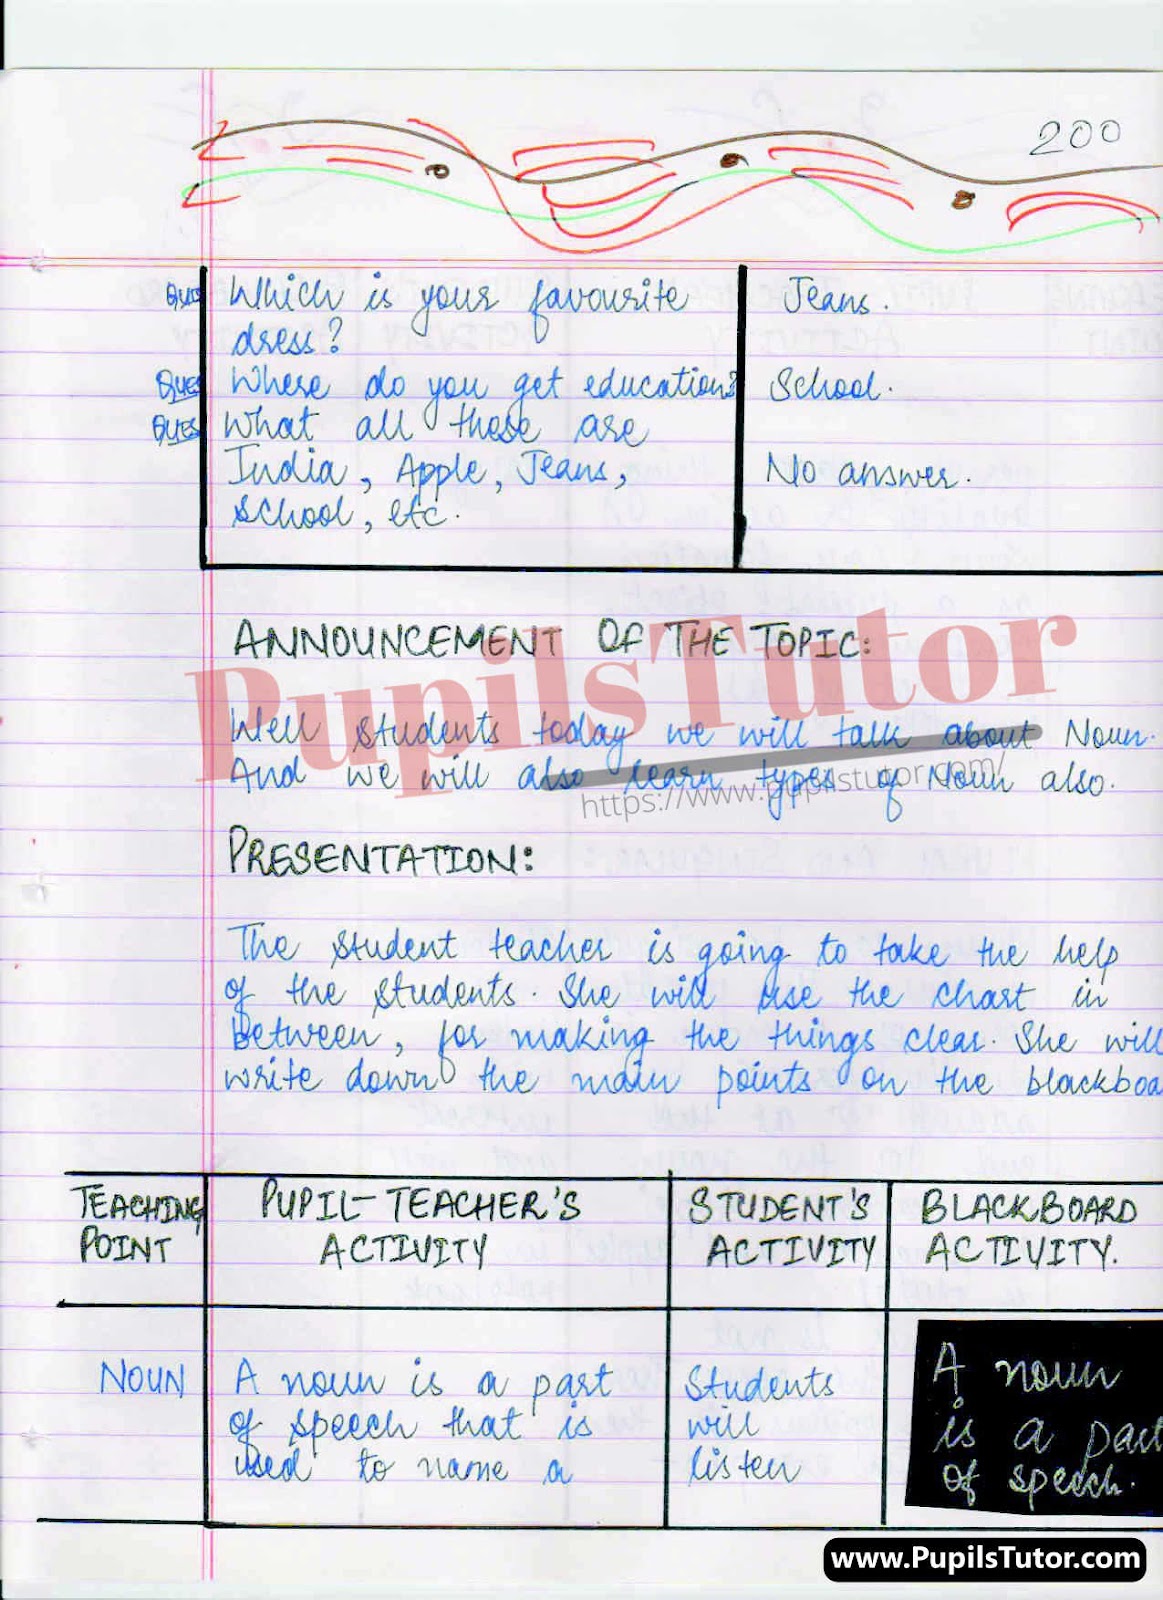 Class/Grade 6 To 9 English Discussion Teaching  Lesson Plan On Noun For CBSE NCERT KVS School And University College Teachers – (Page And Image Number 3) – www.pupilstutor.com